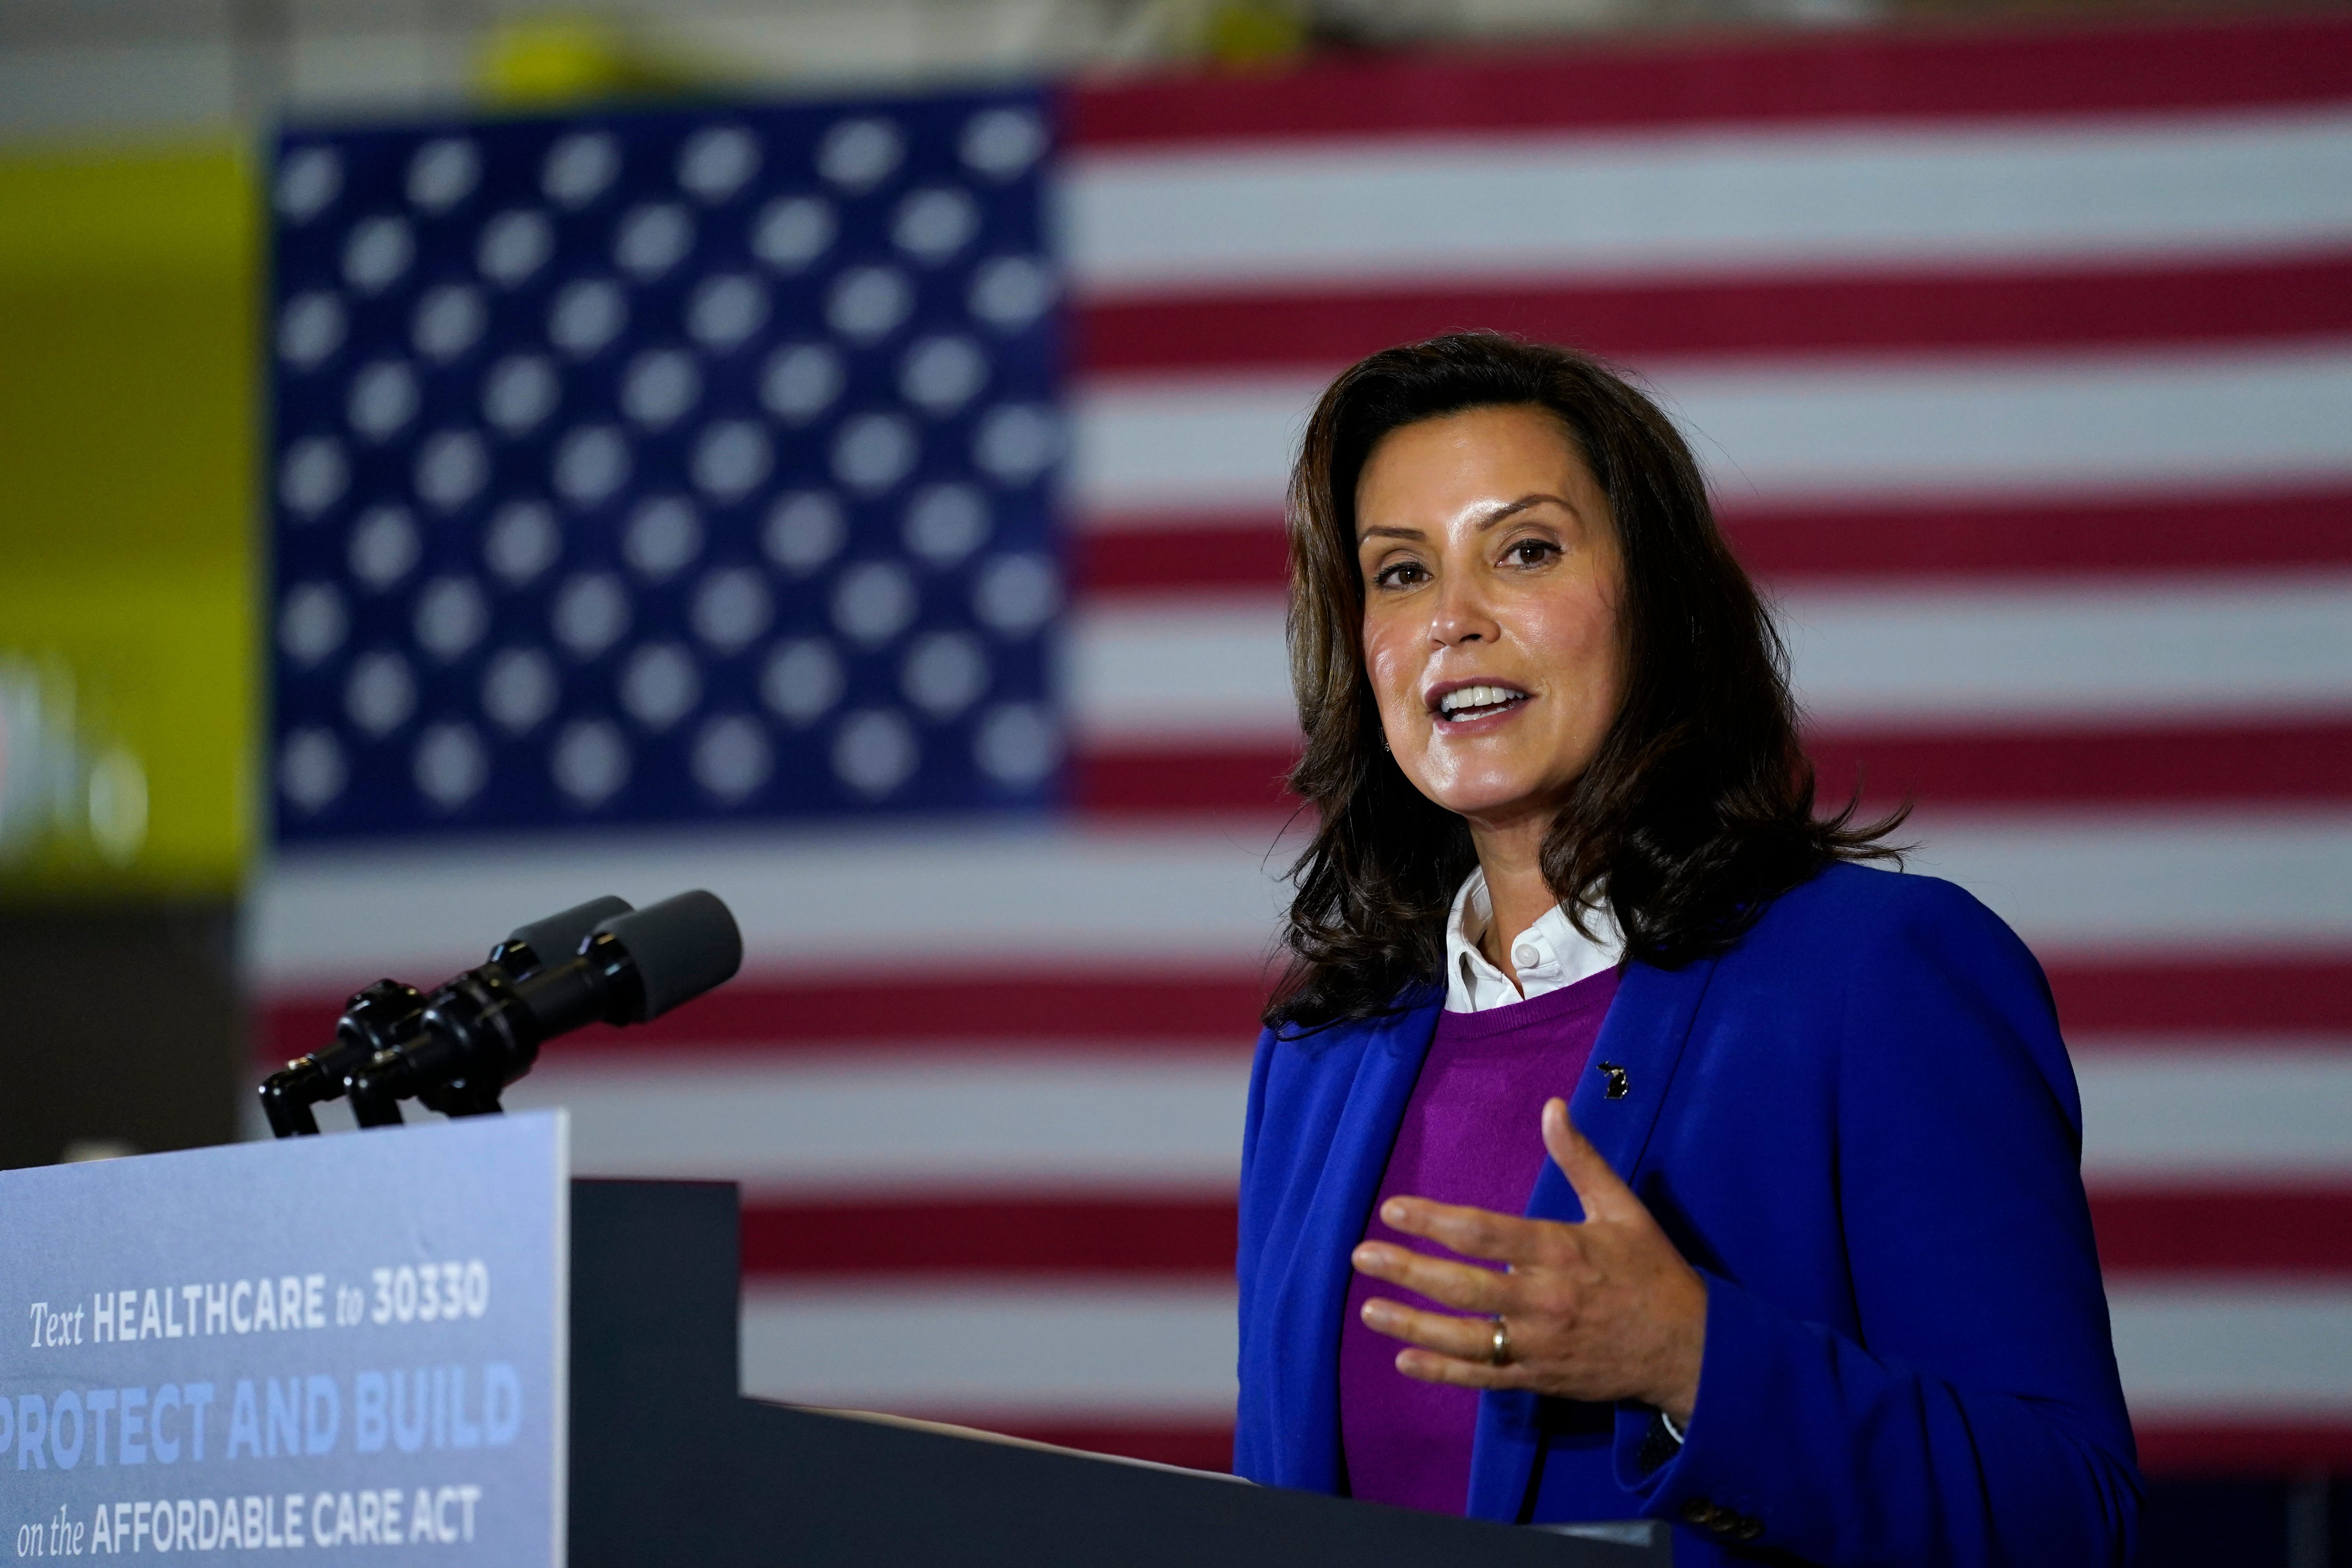 Michigan Gov. Gretchen Whitmer speaks during an event with Democratic presidential candidate former Vice President Joe Biden at Beech Woods Recreation Center, in Southfield, Mich., Friday, Oct. 16, 2020.